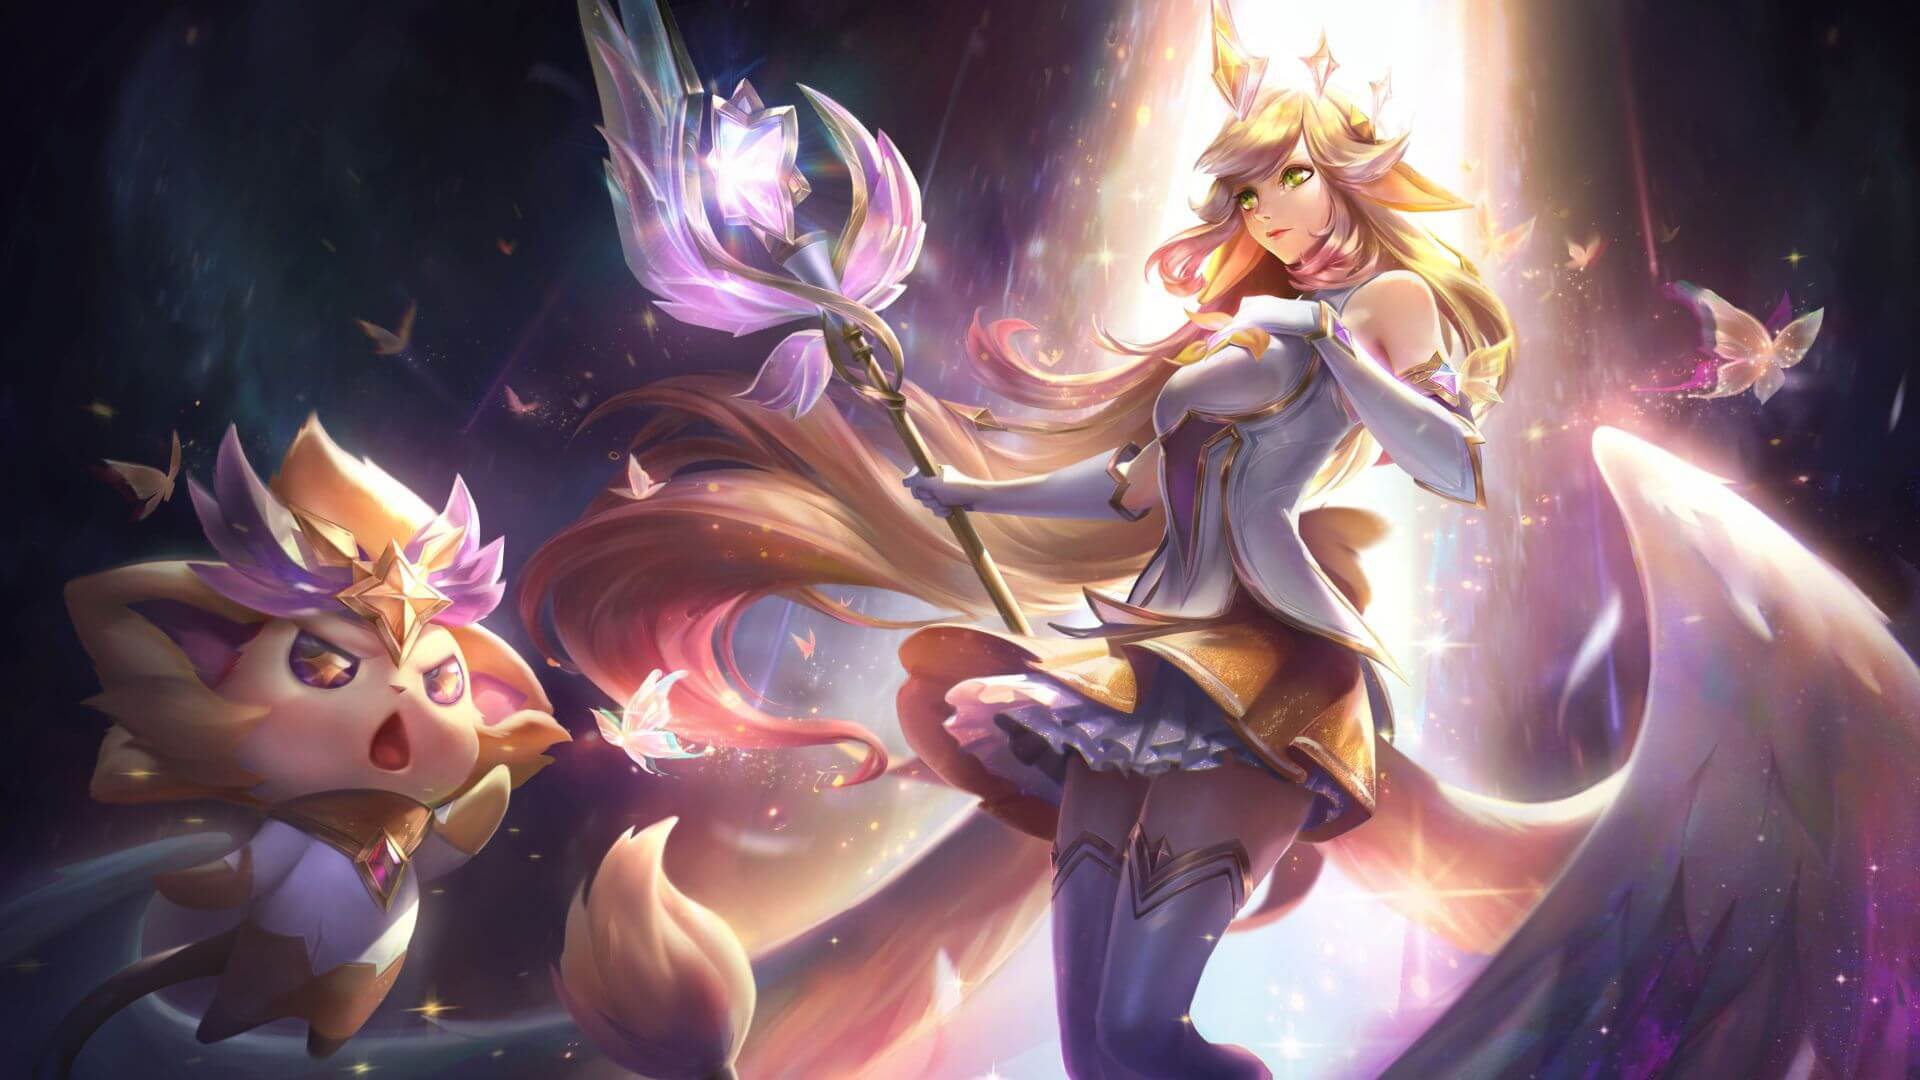 Star Guardian Seraphine, Orianna land on League of Legends PC!